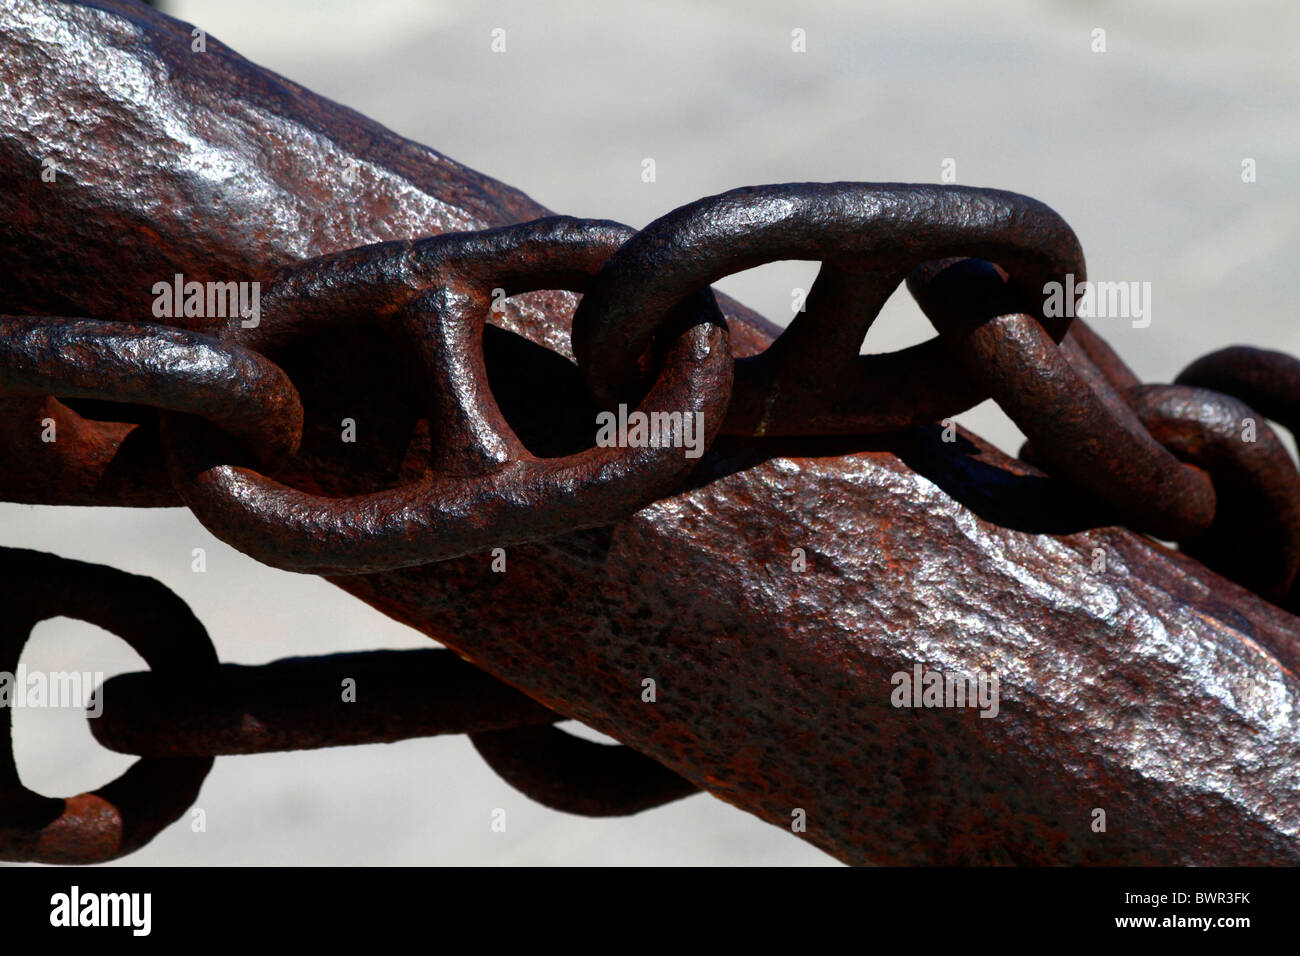 Detail view of a rusty chain Stock Photo